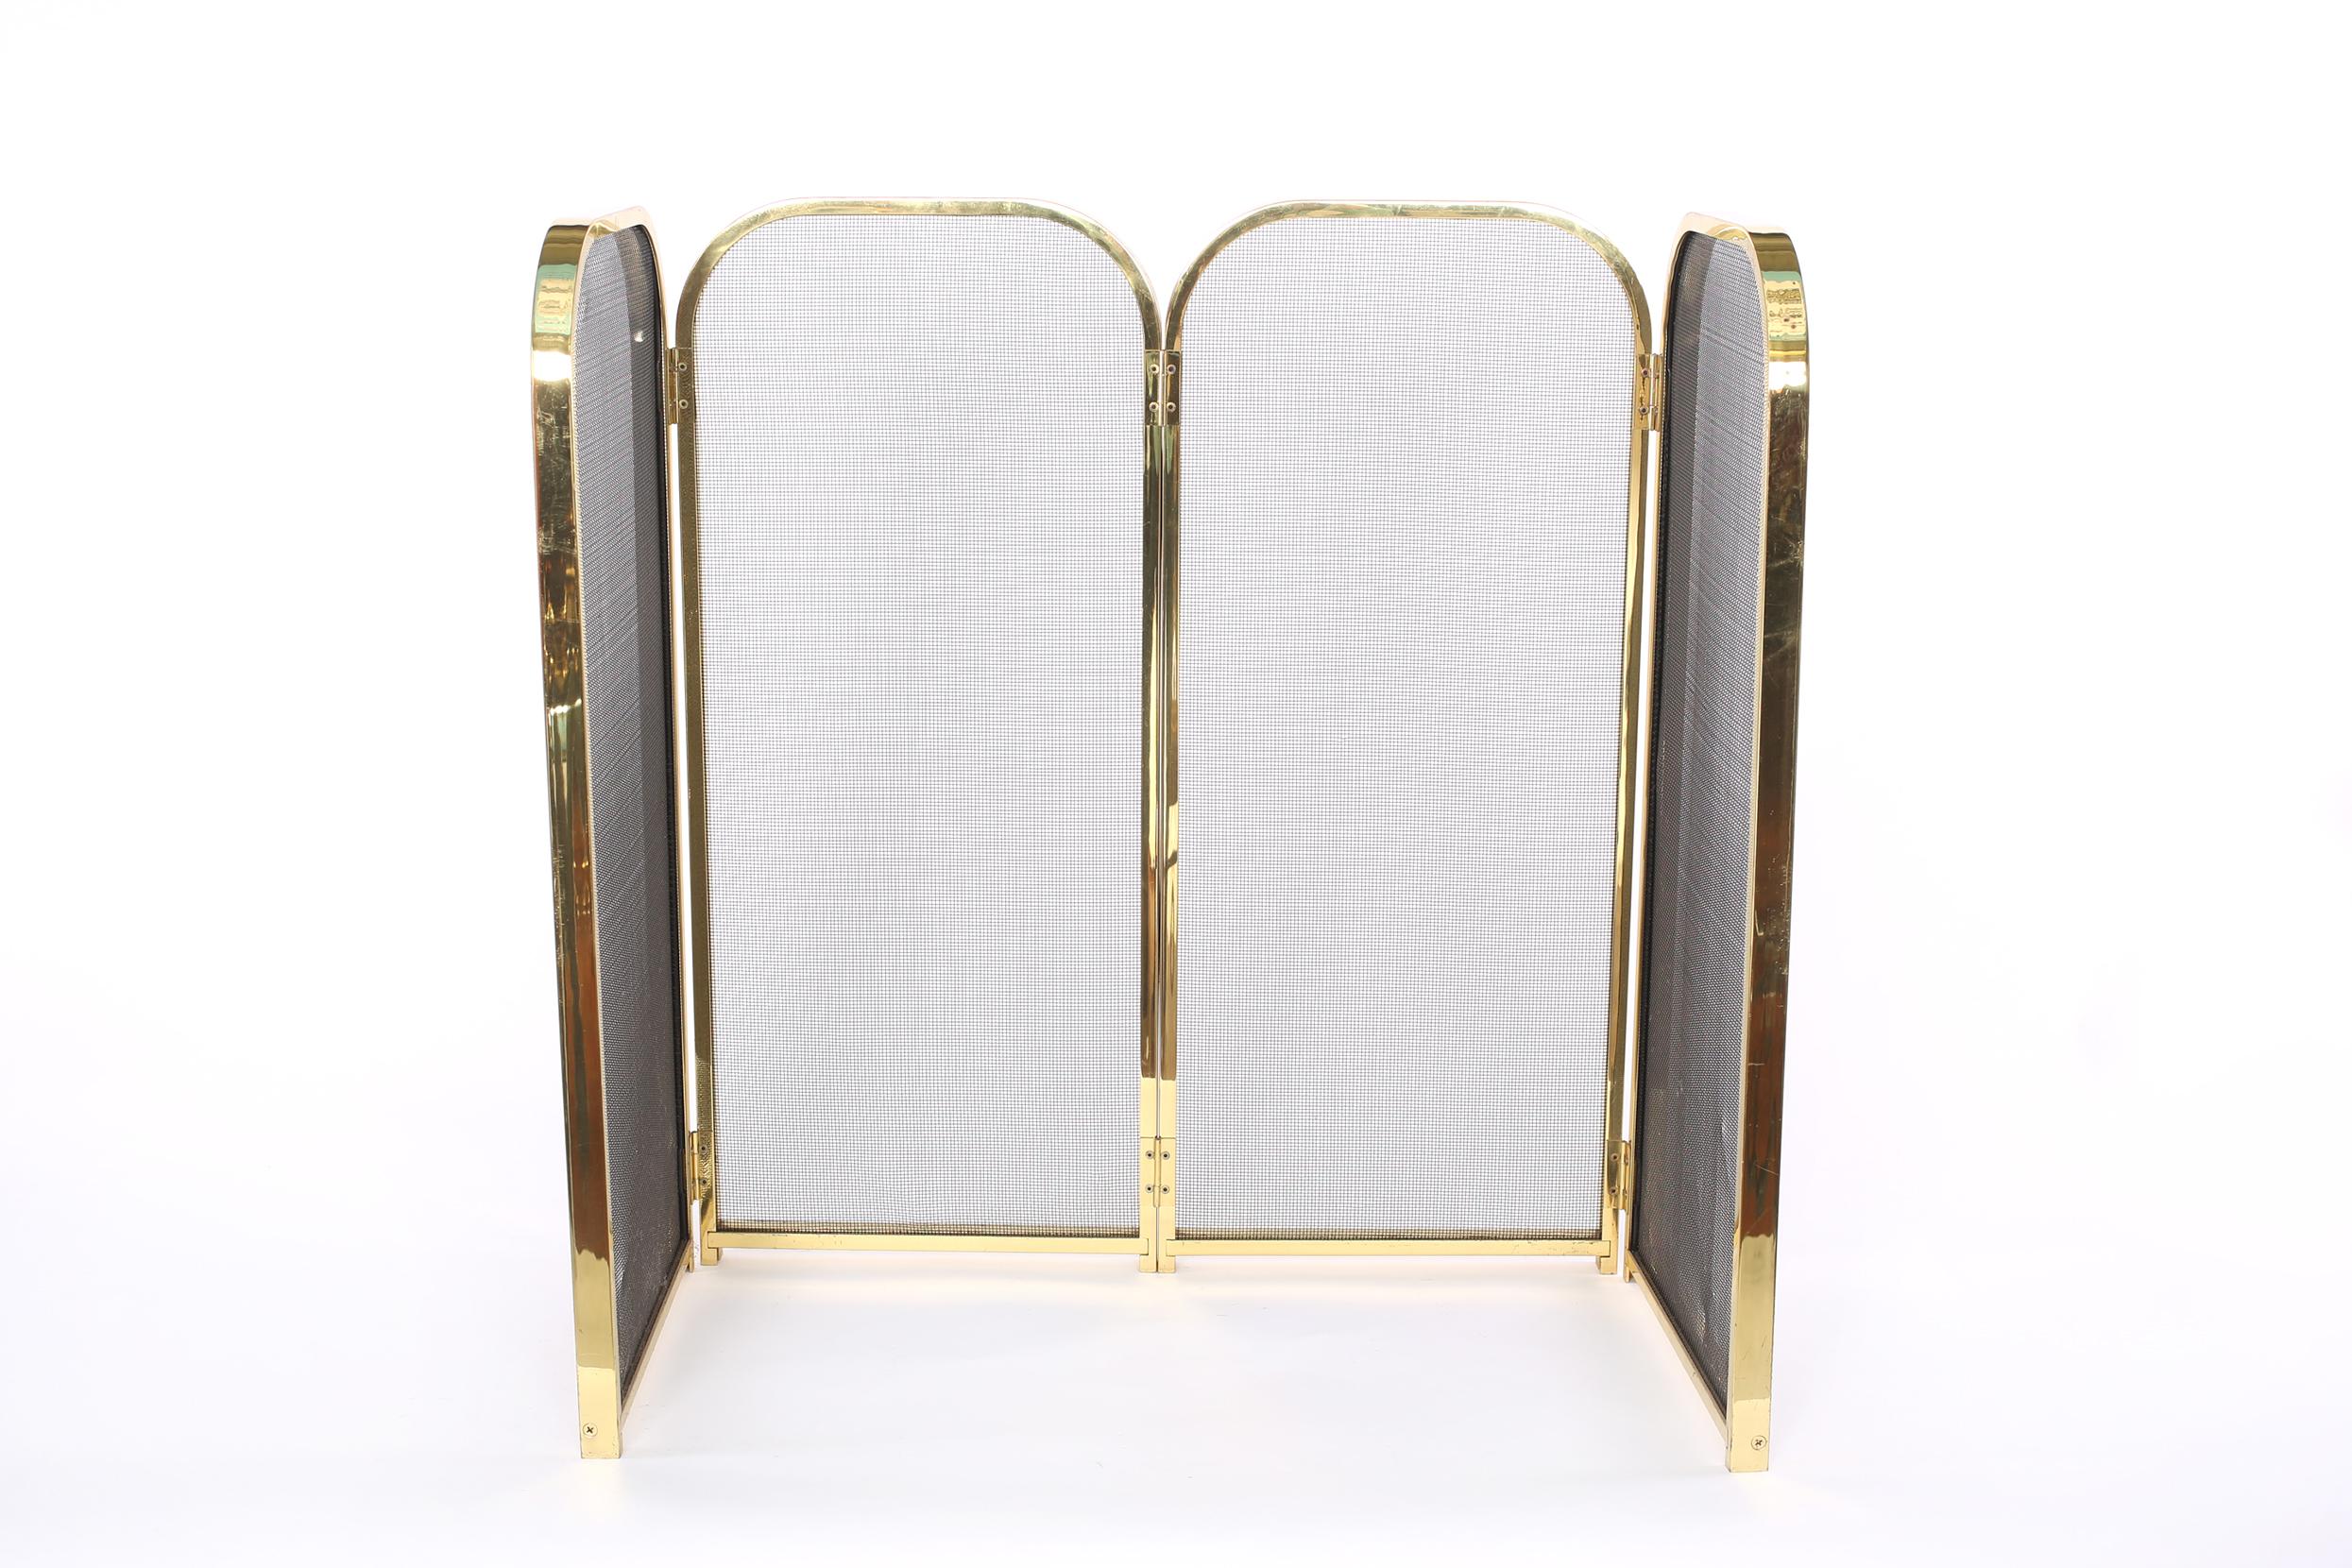 Mid-Century Modern gilt brass Framed with interior black mesh four panels fire place screen. The fire screen Stand about 27 inches high x 12 inches deep x 27 inches wide. Front panel is 26 inches / side panel 12.5 inches.